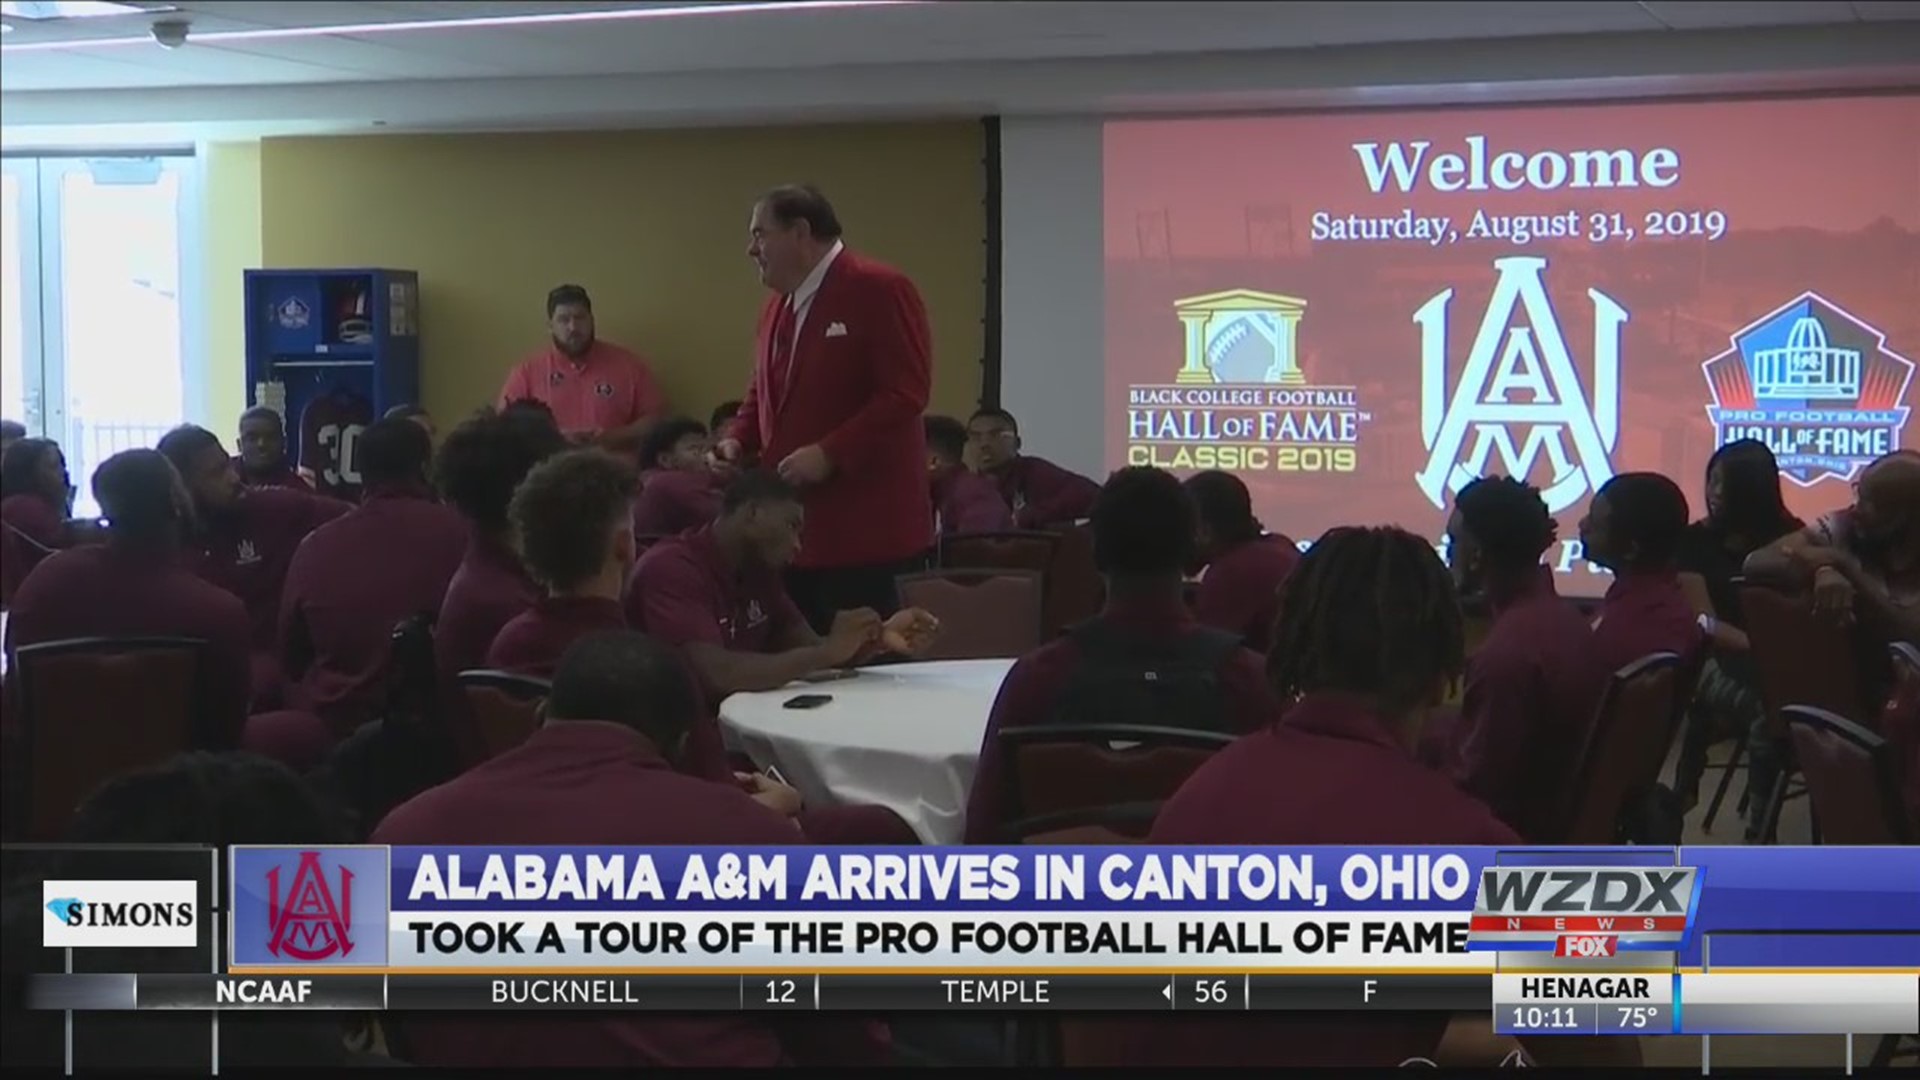 Alabama A&M arrives in Ohio, preps for season opener against Morehouse in BCFHOF Classic